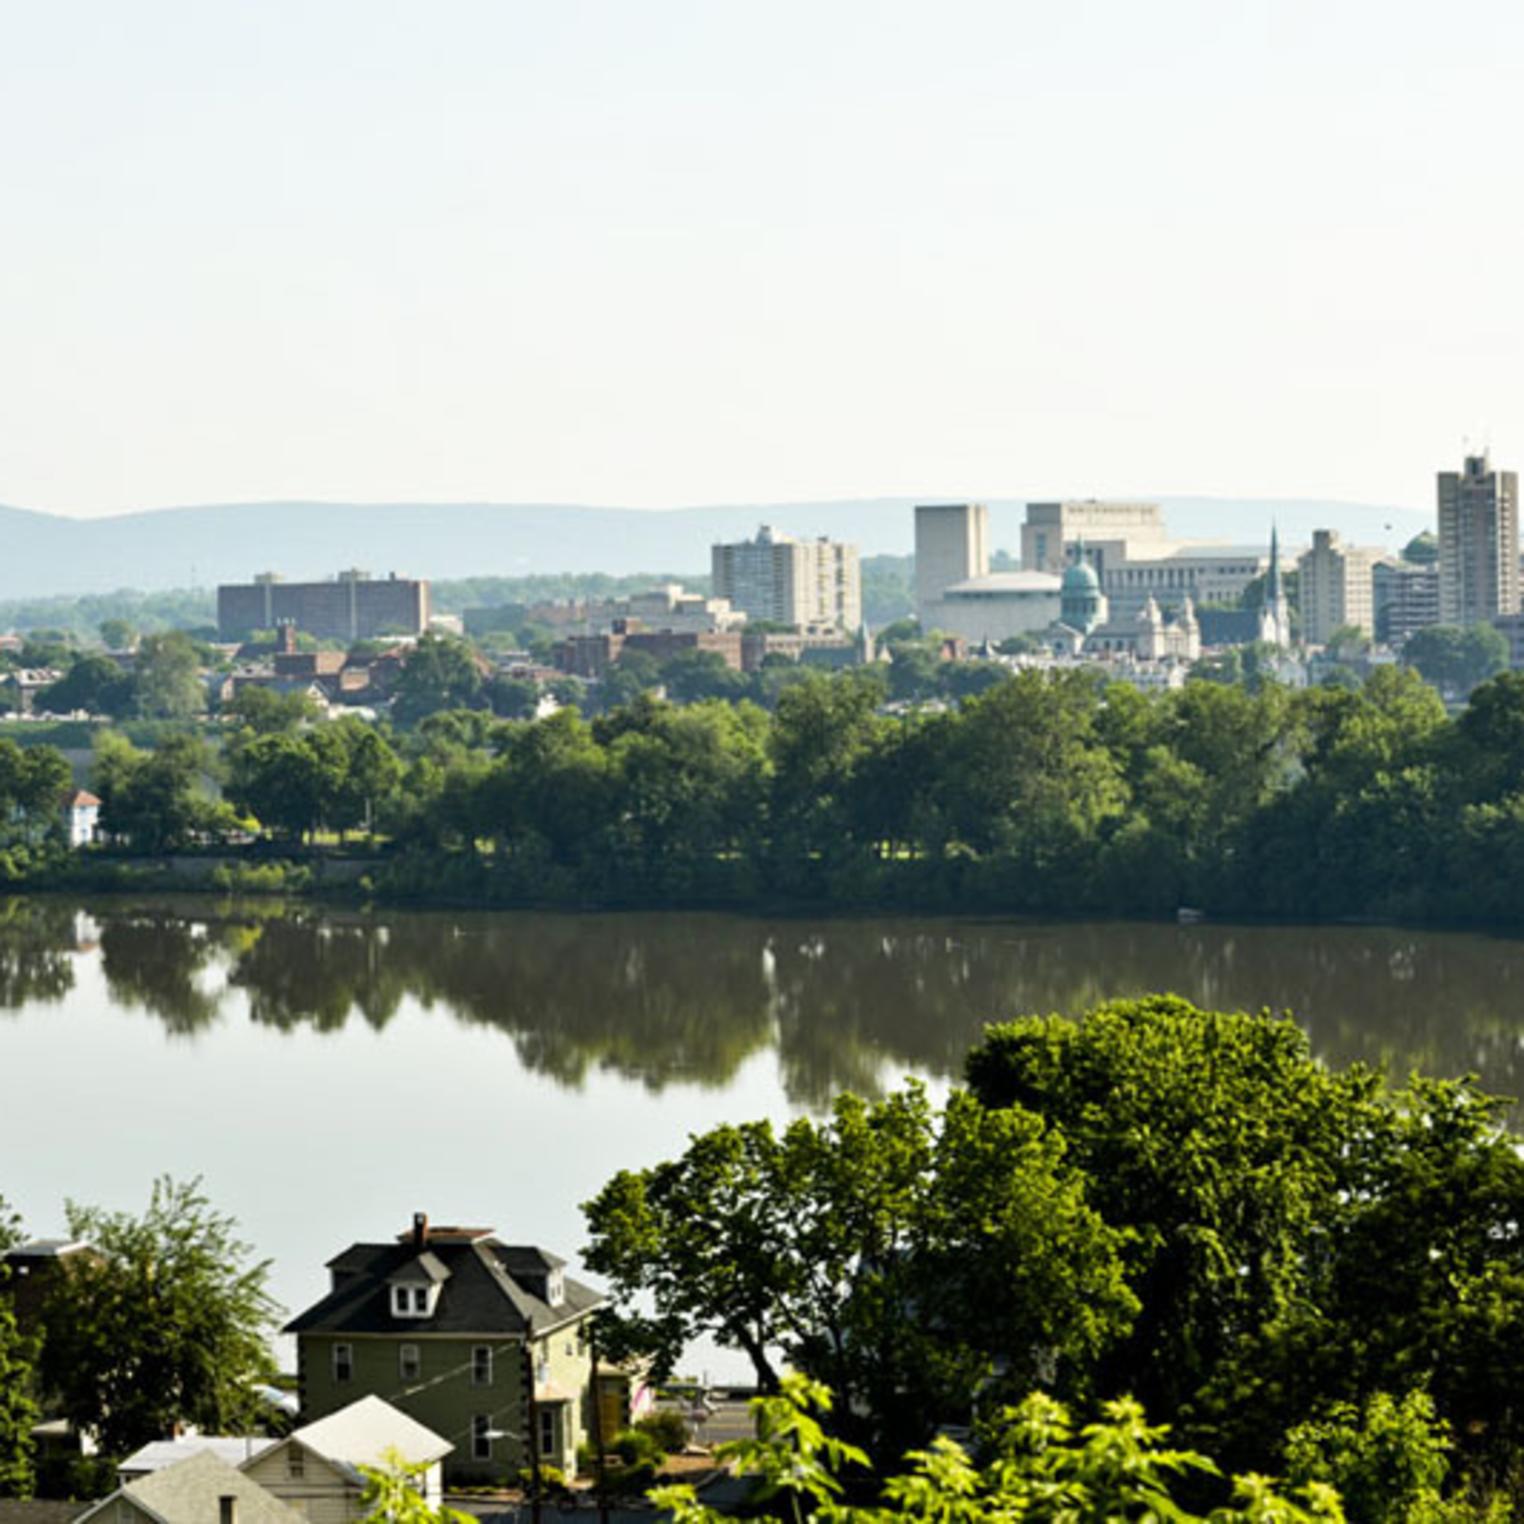 Negley Park overlooking the Susquehanna River and Harrisburg